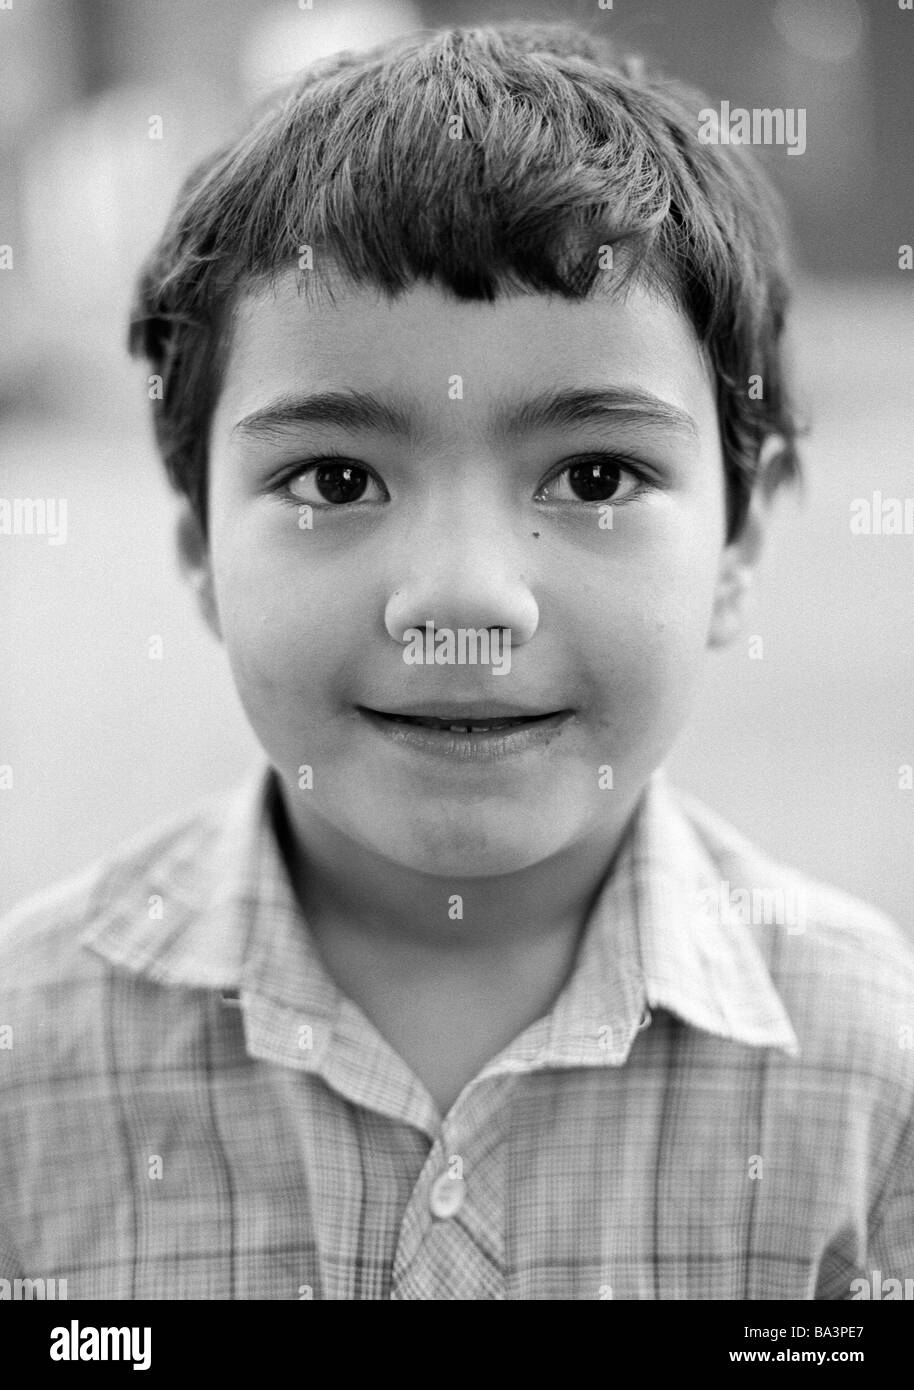 Seventies, black and white photo, people, children, little boy, portrait, aged 9 to 12 years Stock Photo